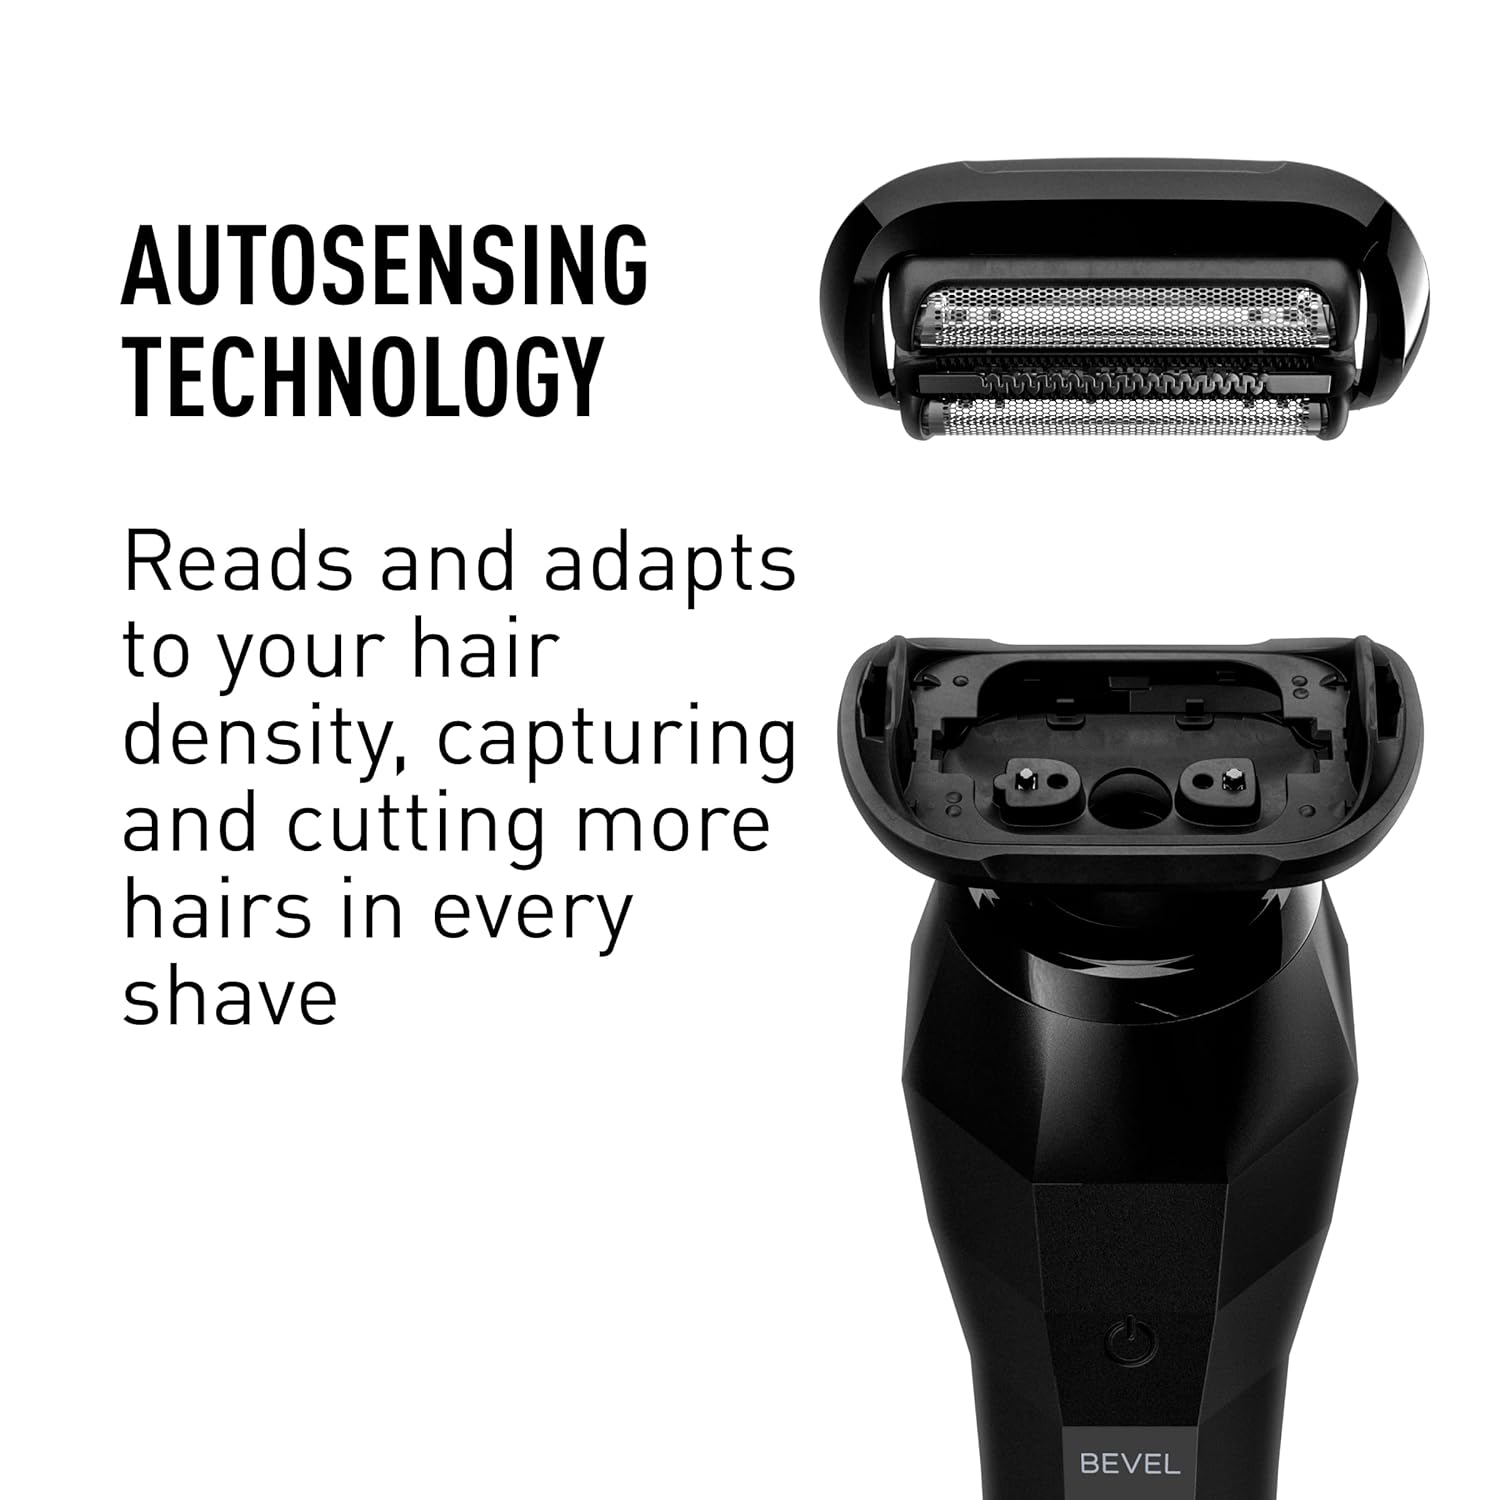 Bevel Electric Shaver for Men, Electric Foil Shaver, Wet and Dry, Waterproof, Fast Charging, Cordless Rechargeable, Black : Beauty & Personal Care